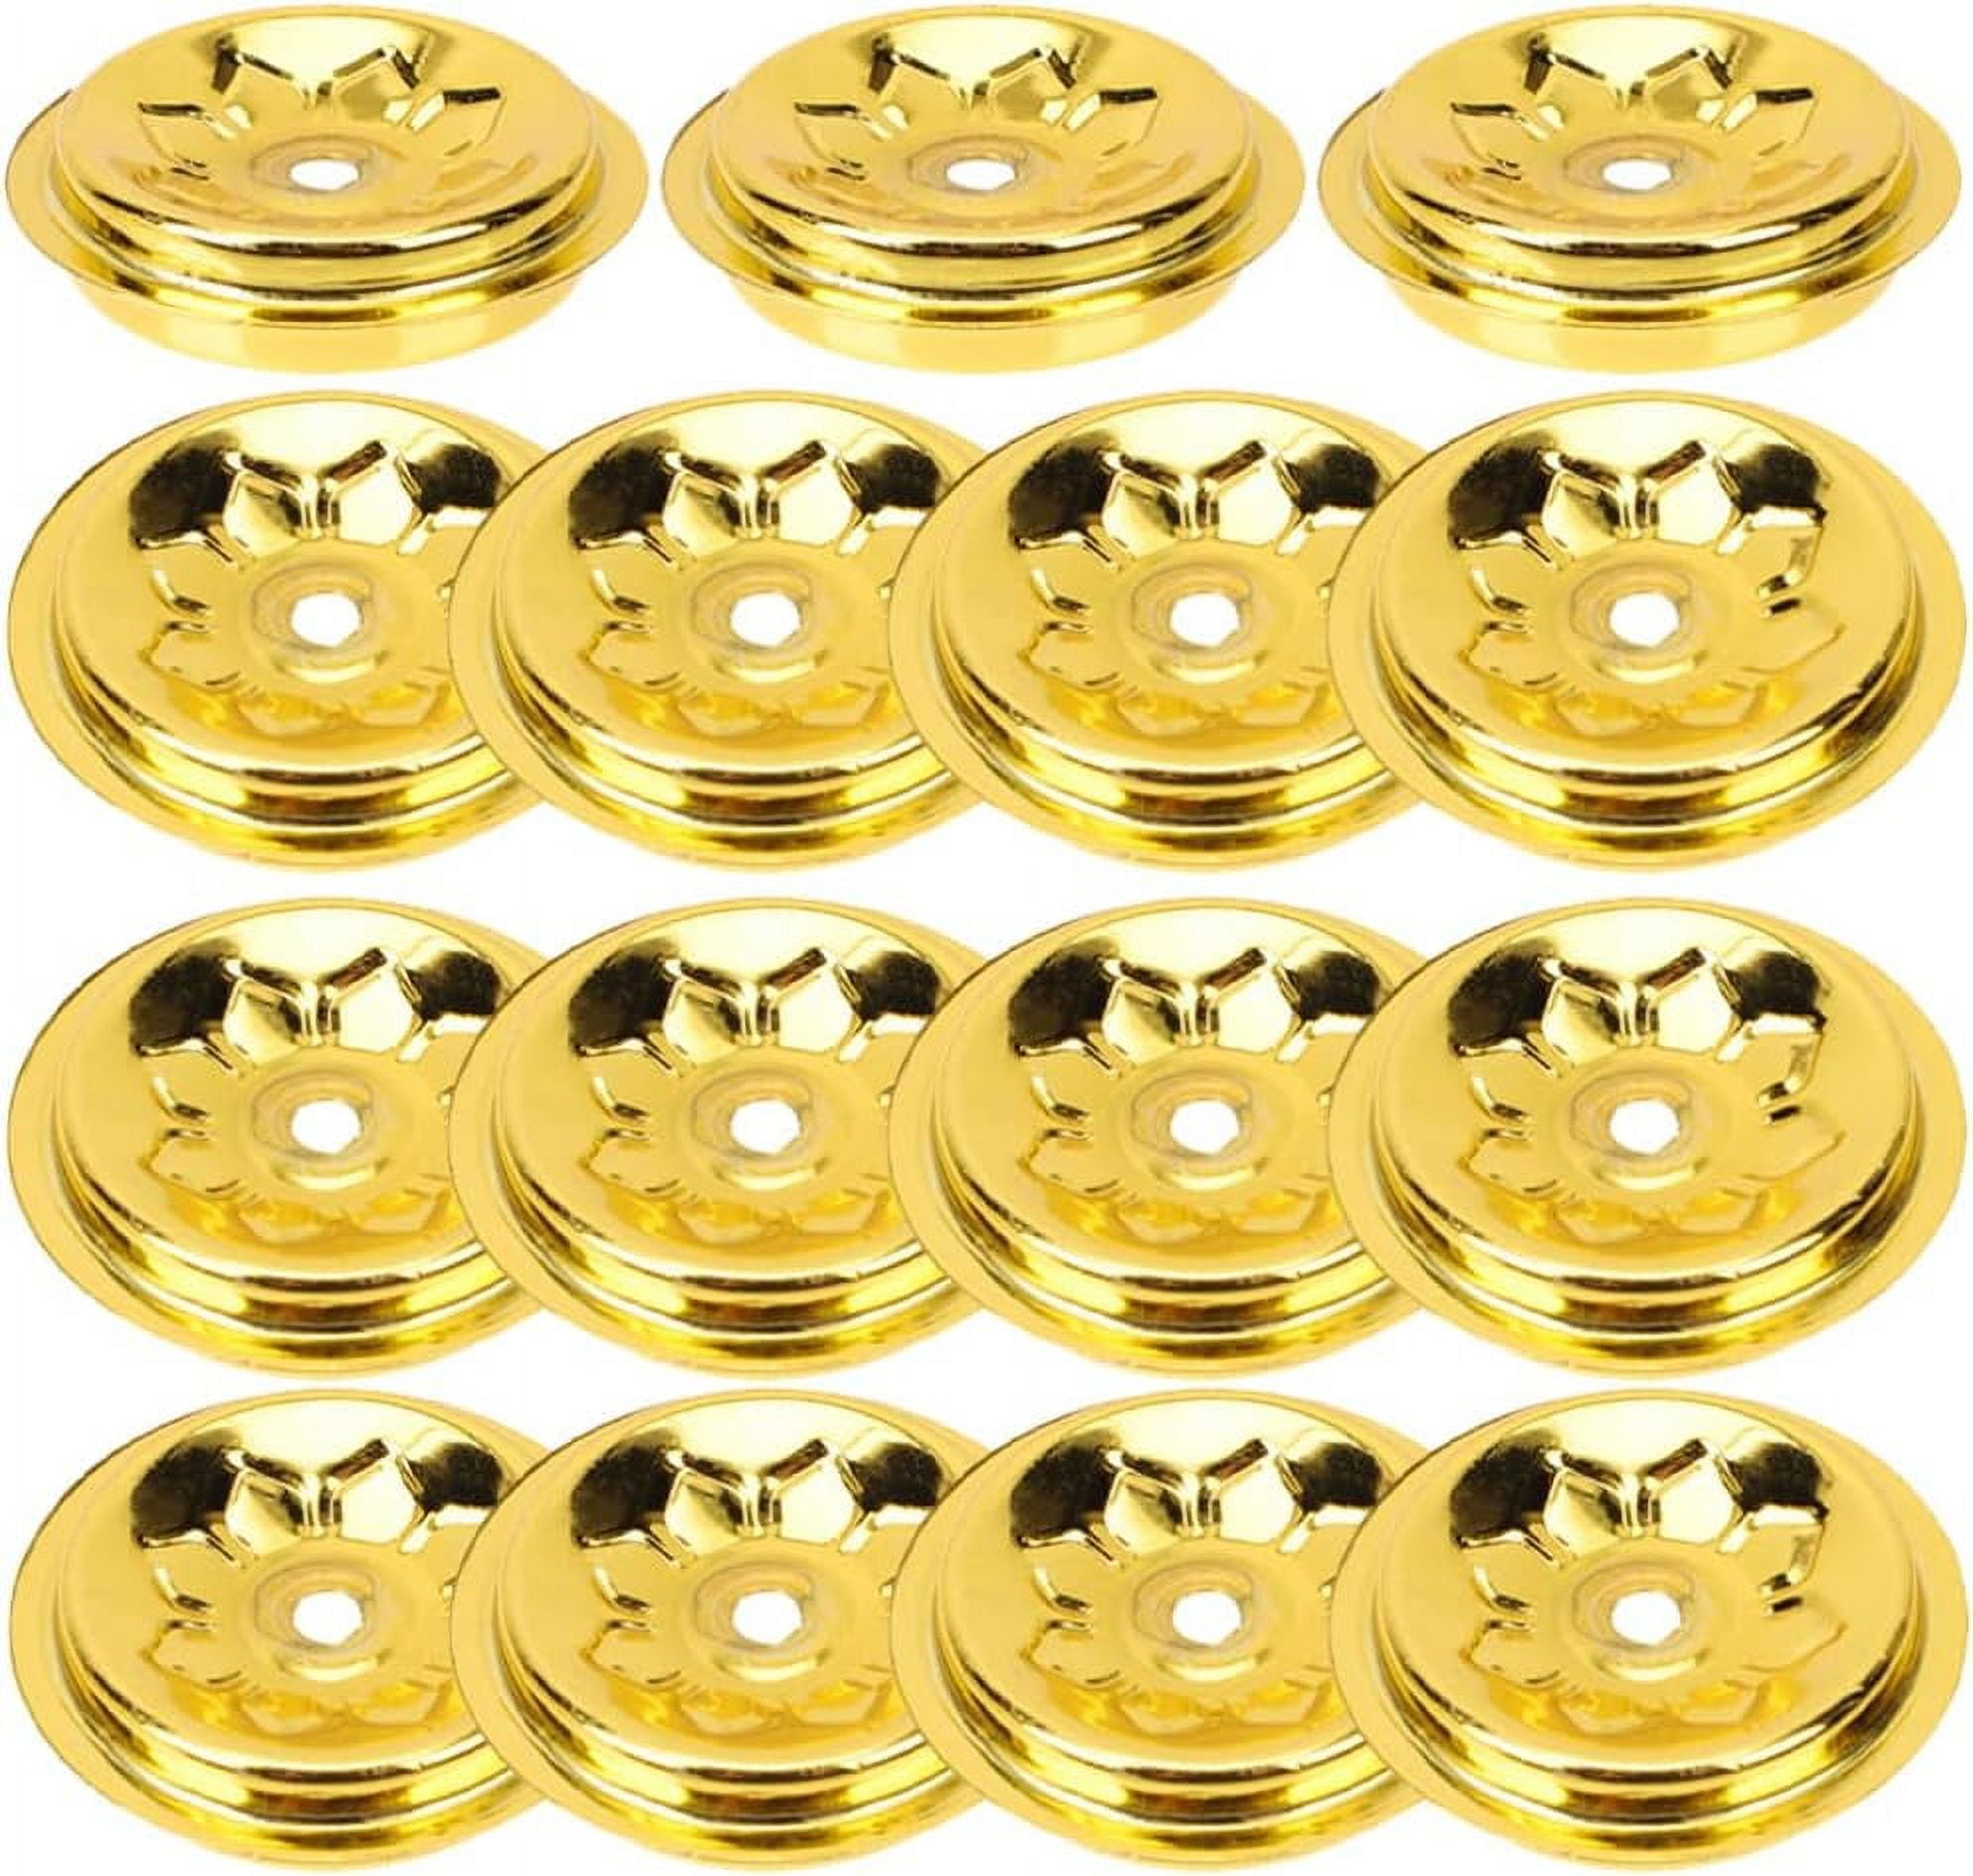 Wedding Ornament 12Pcs Floating Candle Wick Holder Metal Oil Candle  Floating Wicks Disc Butter Lamp Wick Holder Replacement Buddhist Supplies  Brass